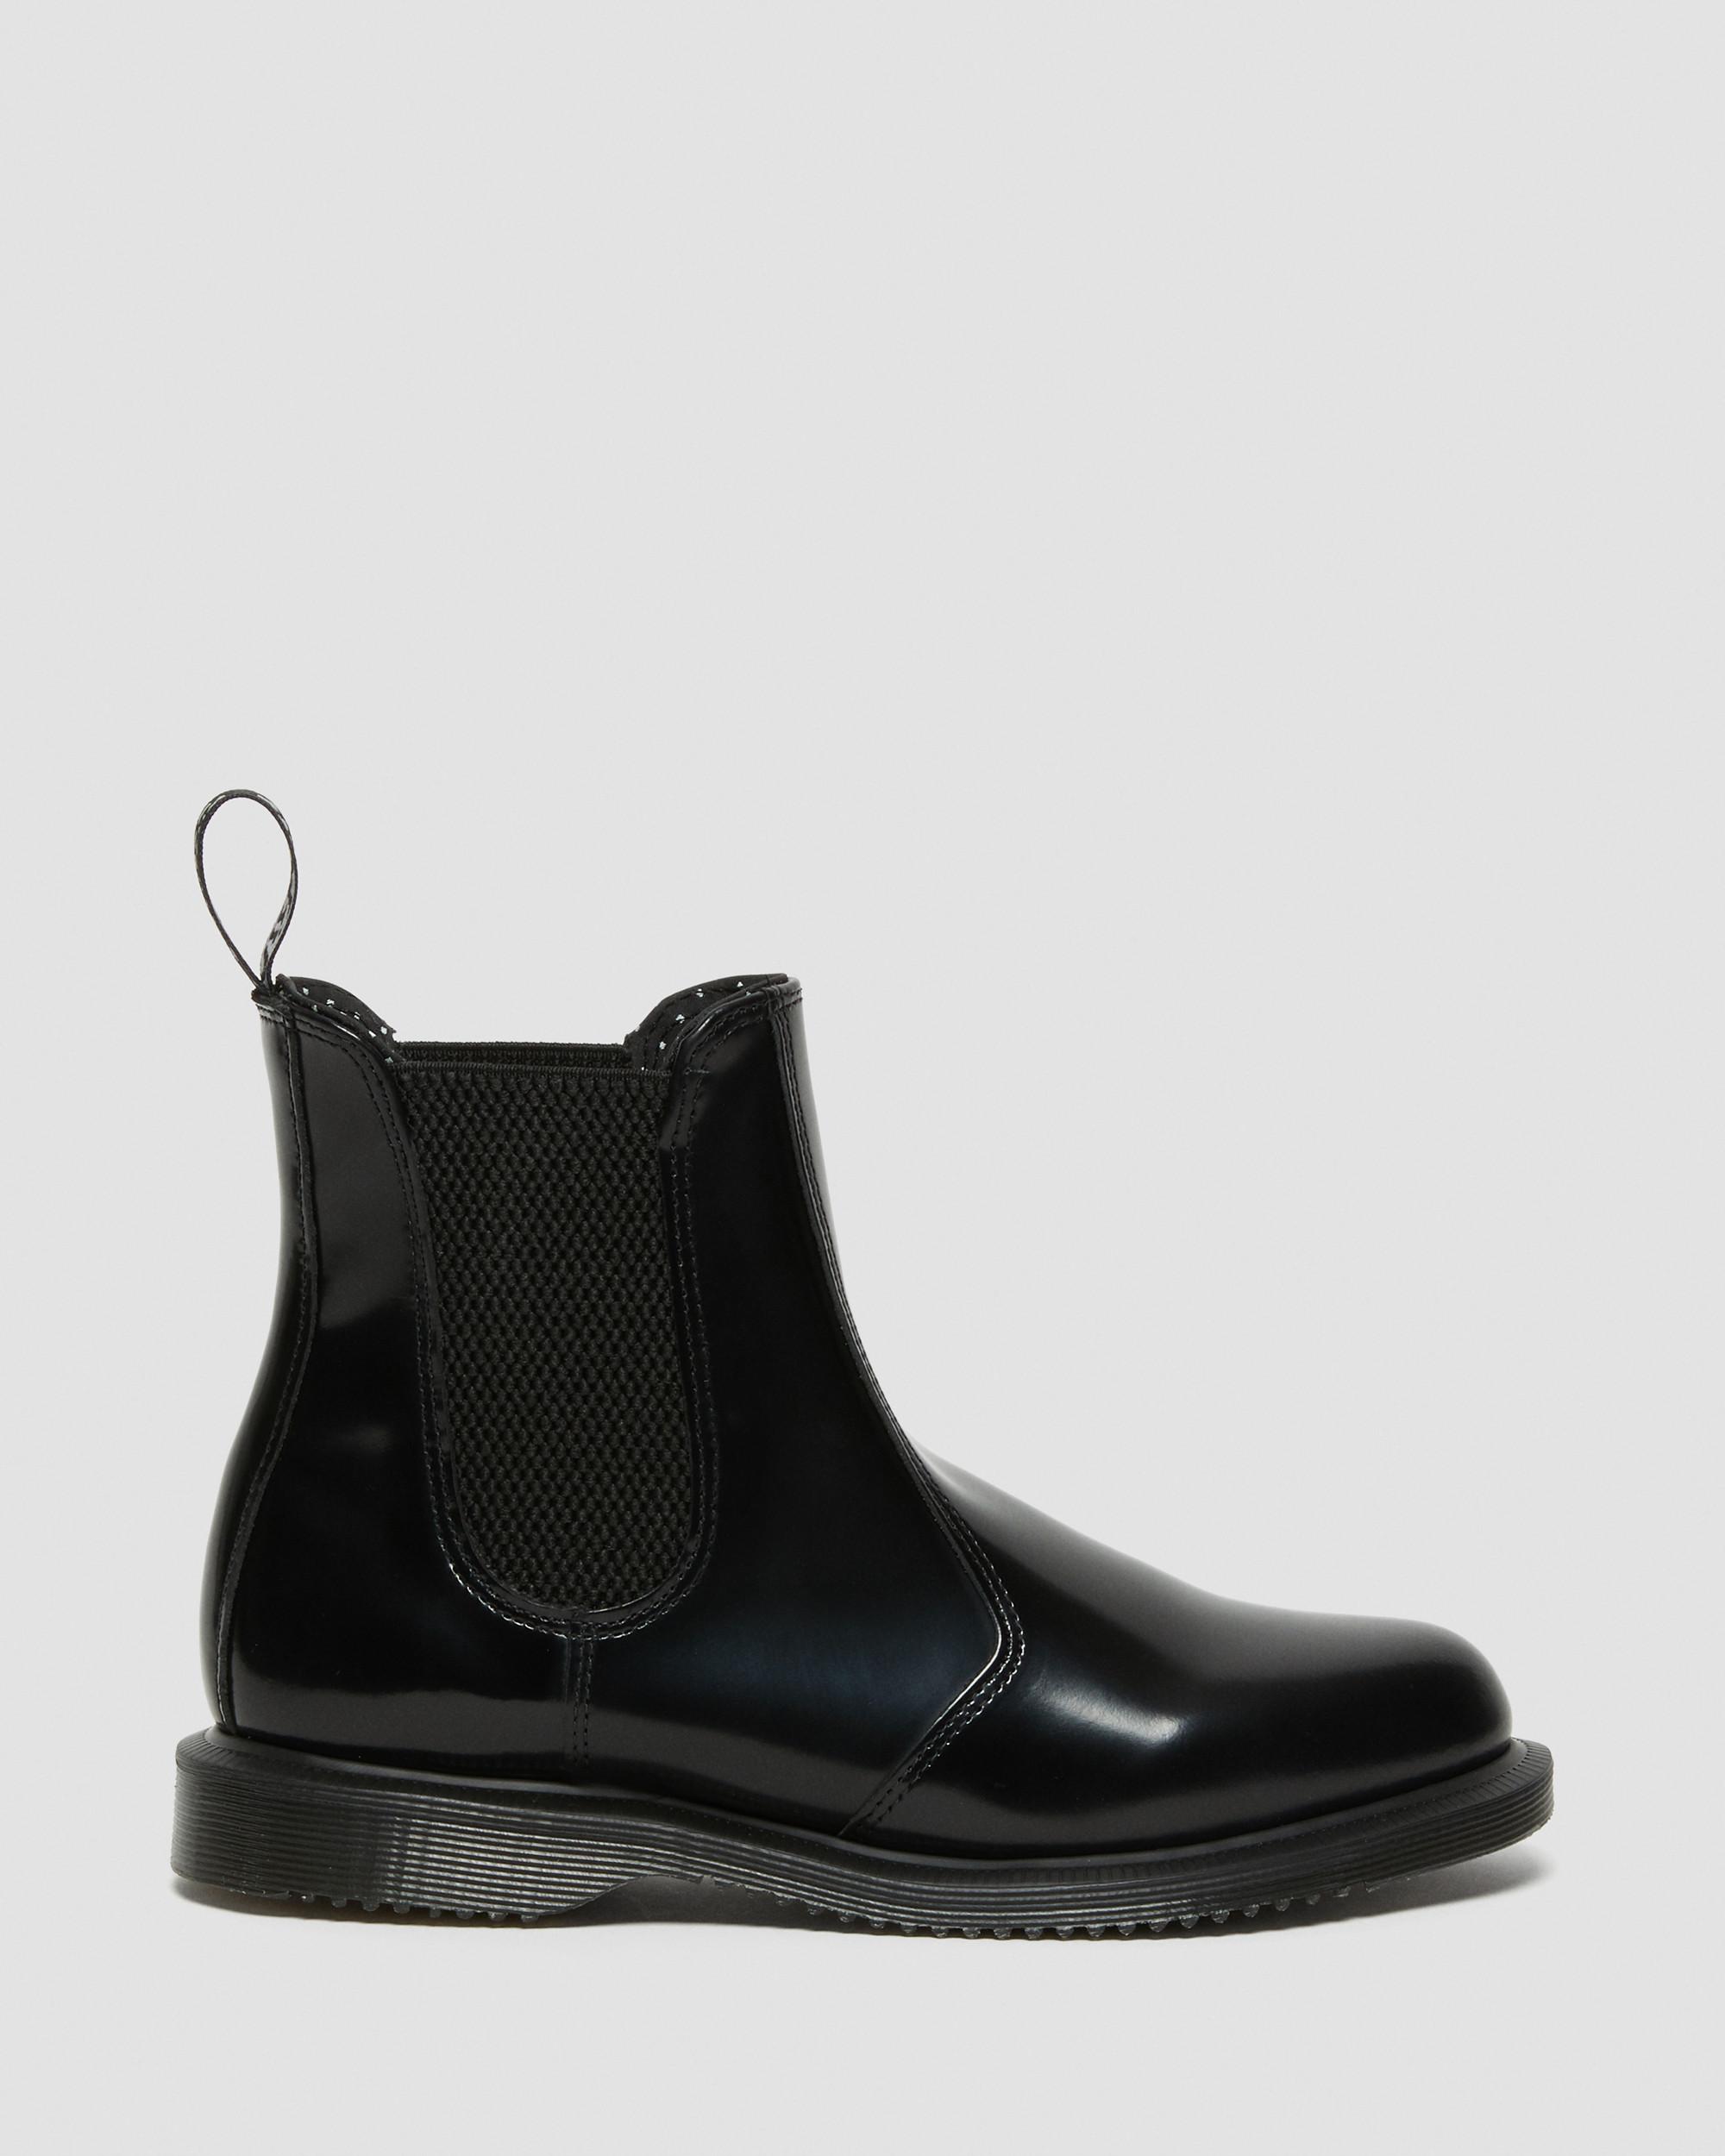 Flora Women's Smooth Leather in Black Dr. Martens